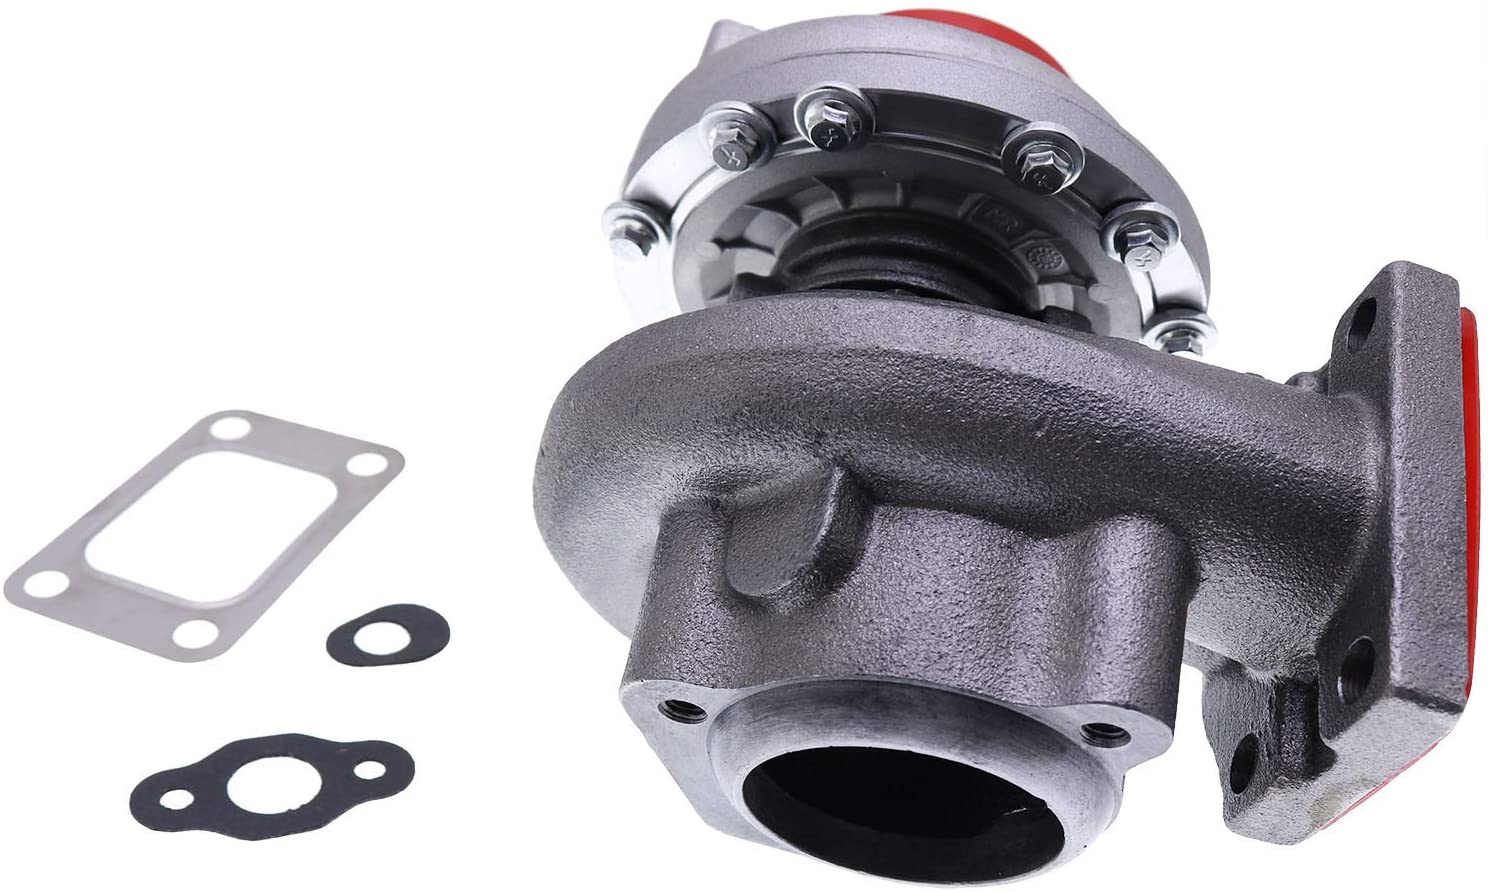 Turbocharger GT2052S 2674A324 2674A382 727265-0002 727265-5002S for Perkins Engine T4.40